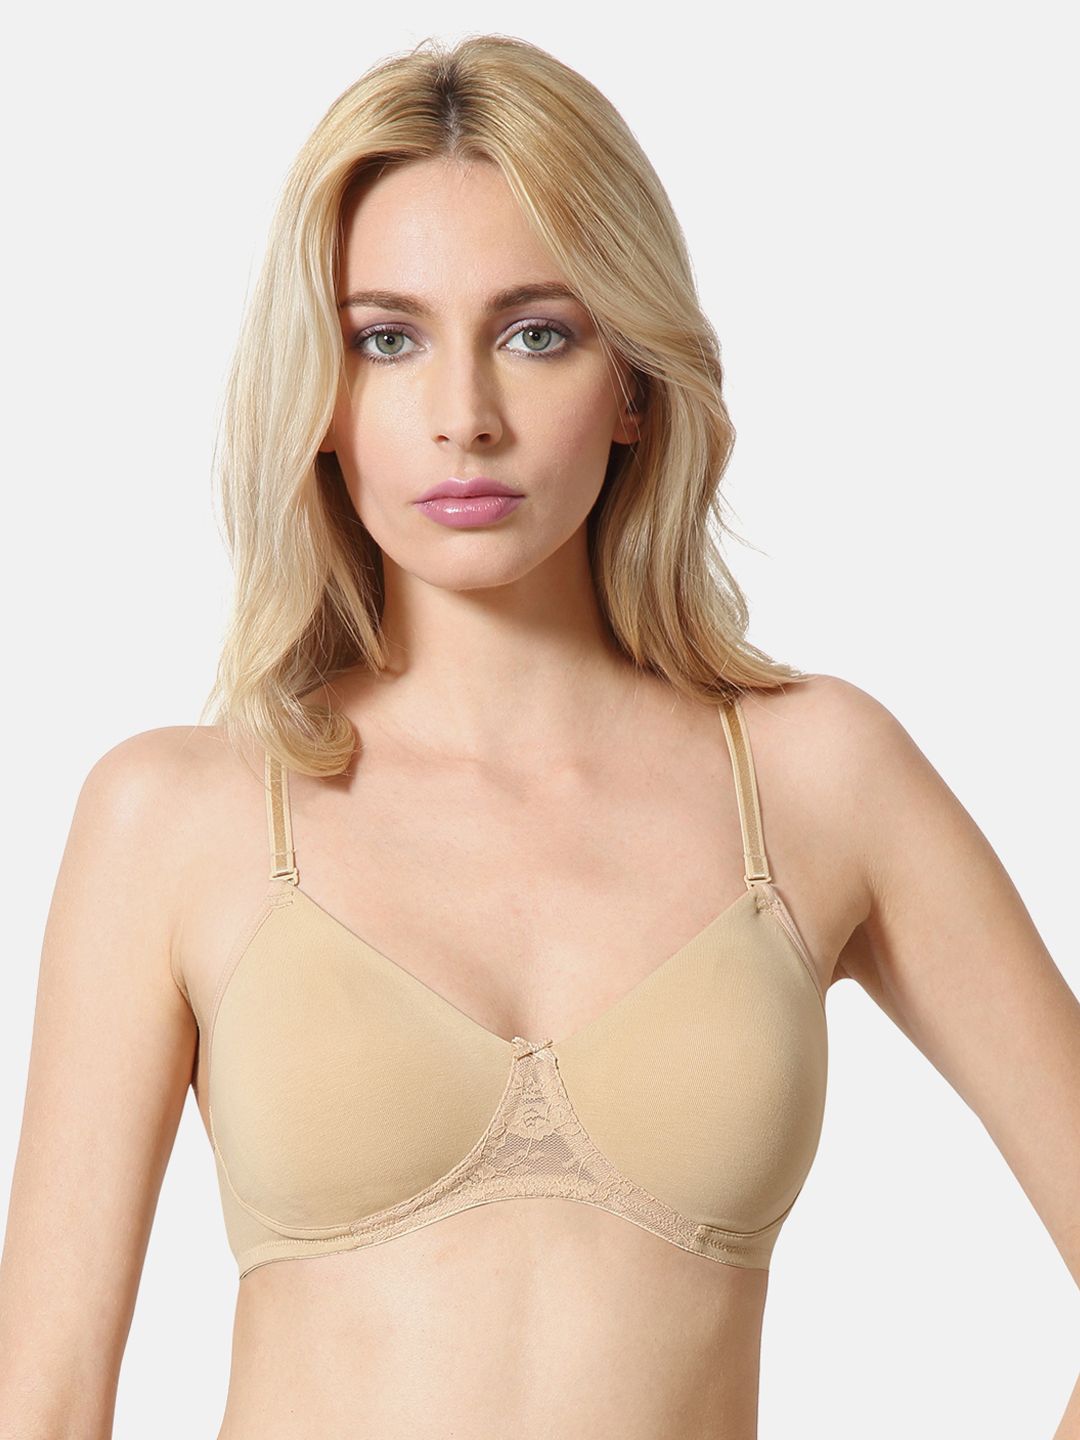 Van Heusen Beige Solid Non-Wired Non Padded Seamless Shaper Bra ILIBR1CSSWW3711001 Price in India